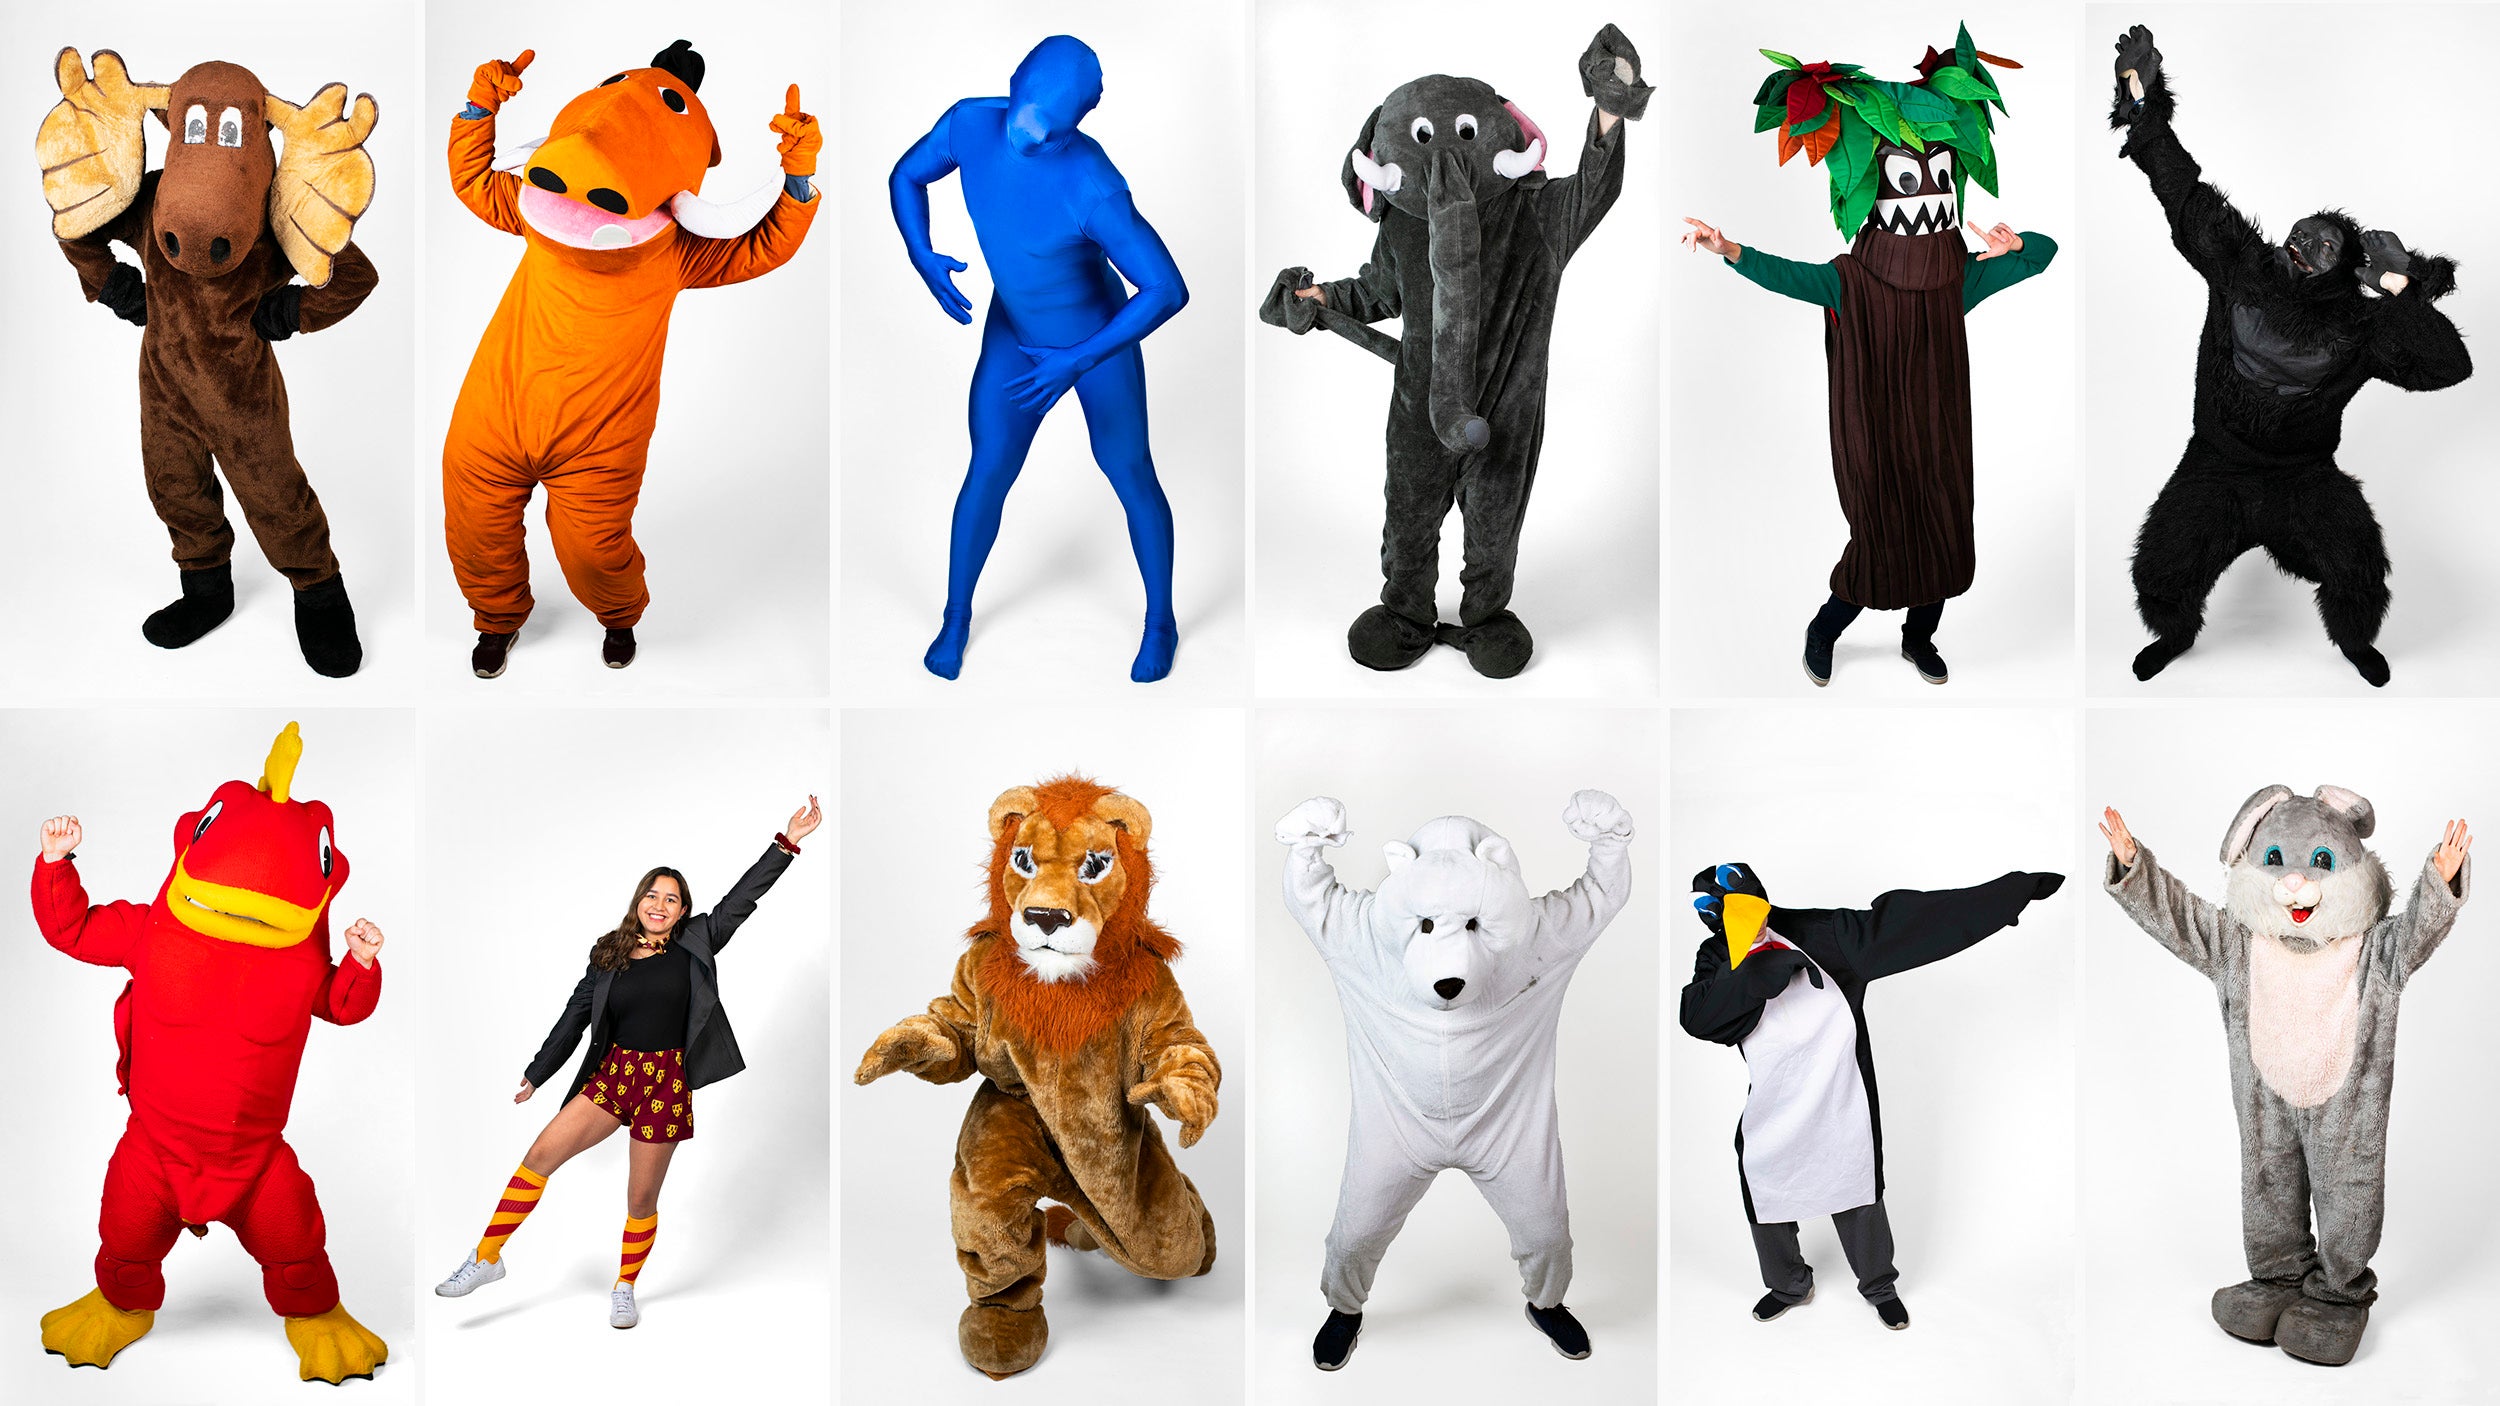 All twelve House mascots are pictured in costume striking a pose.